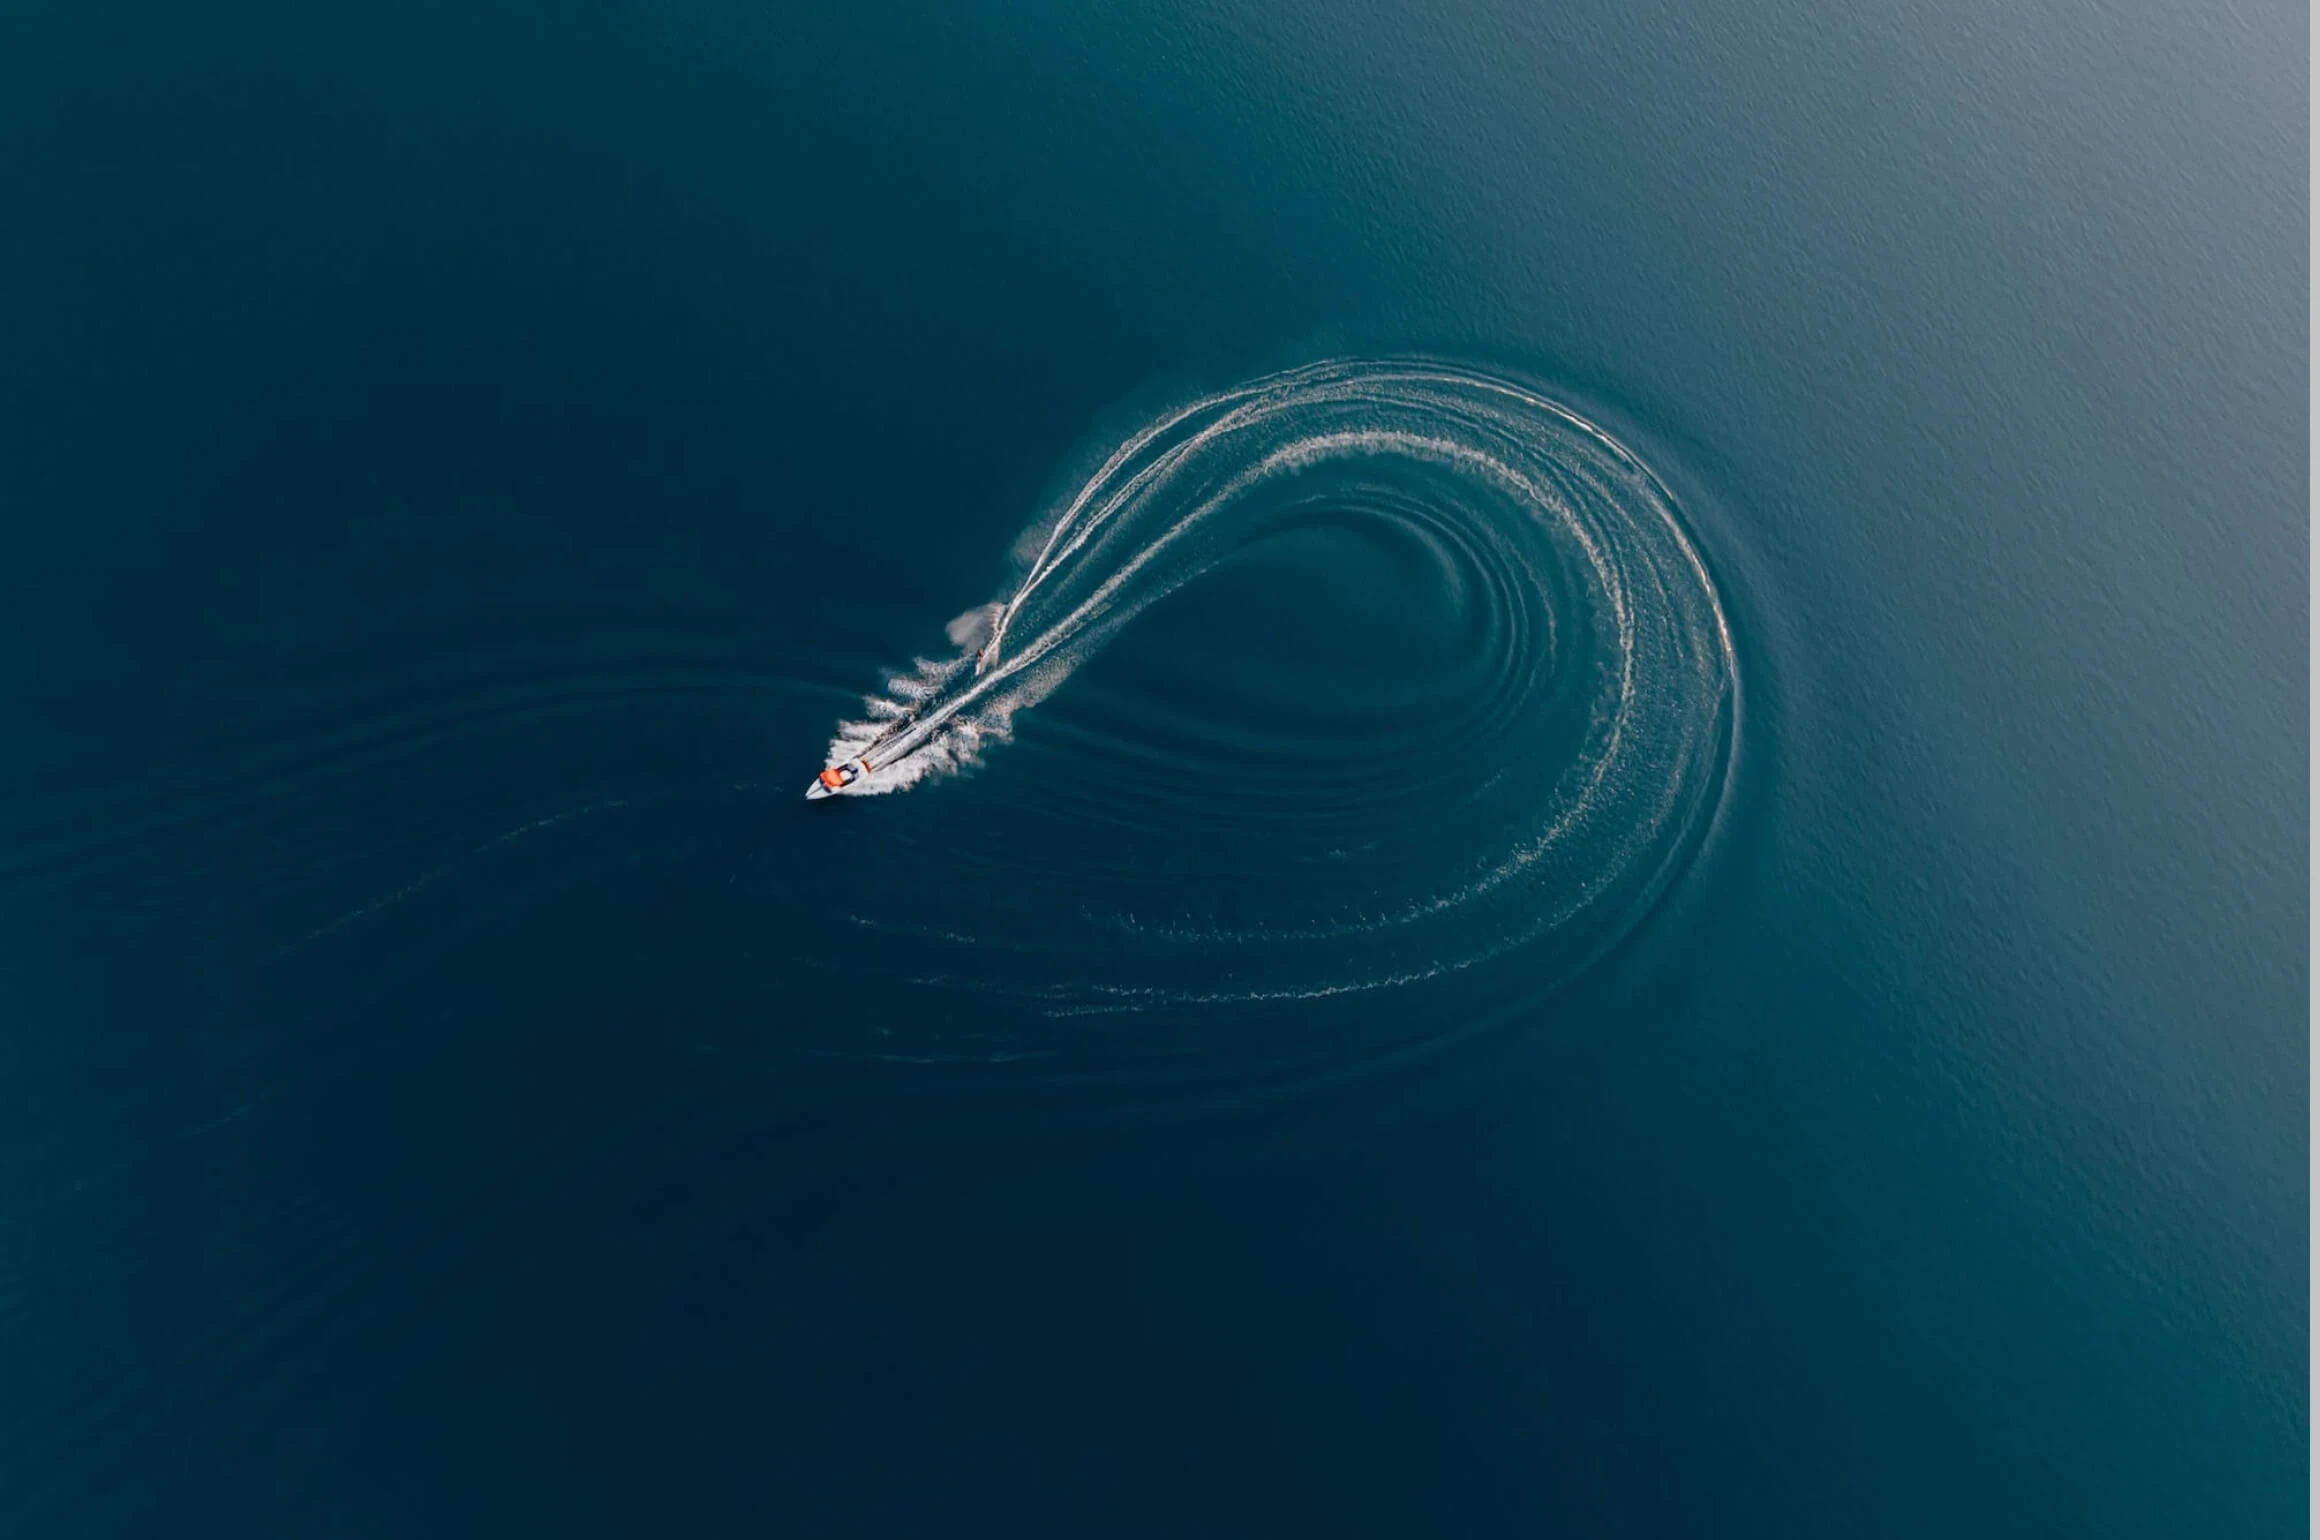 A boat in the ocean making waves